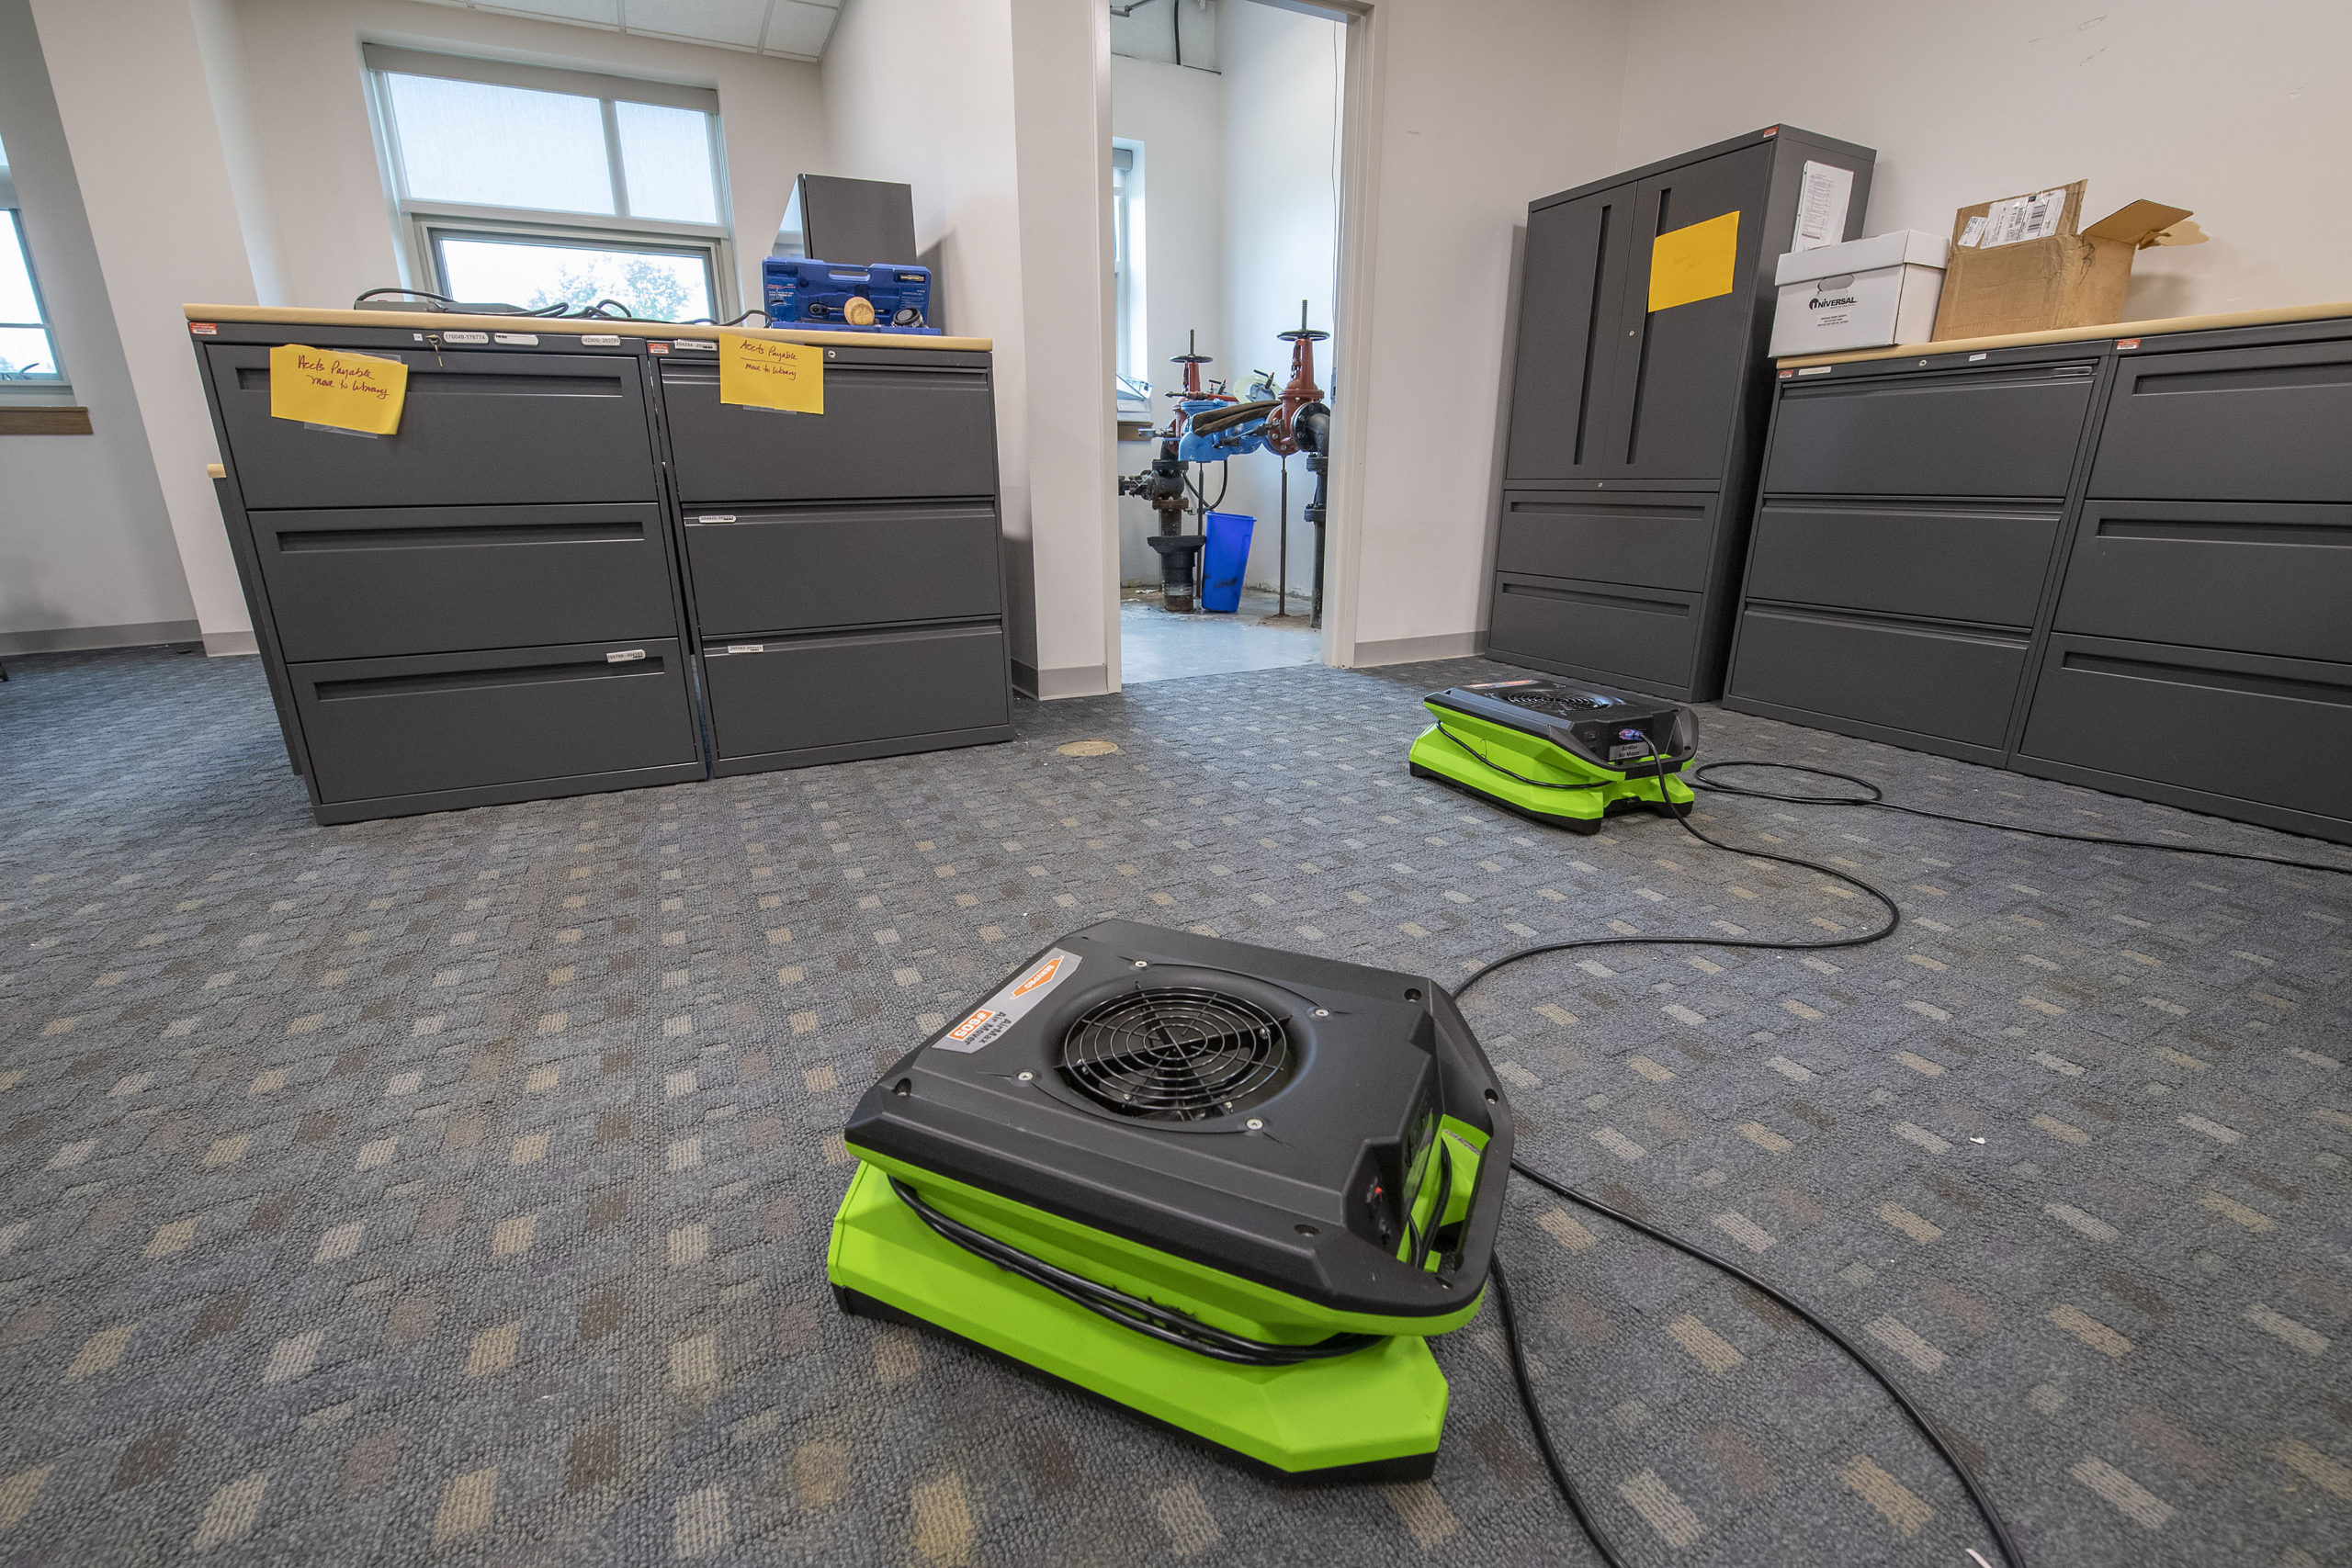 Carpeting and drywall in the East Hampton School District's administrative offices will have to be replaced after a flood caused by a broken water pipe over the weekend. MICHAEL HELLER